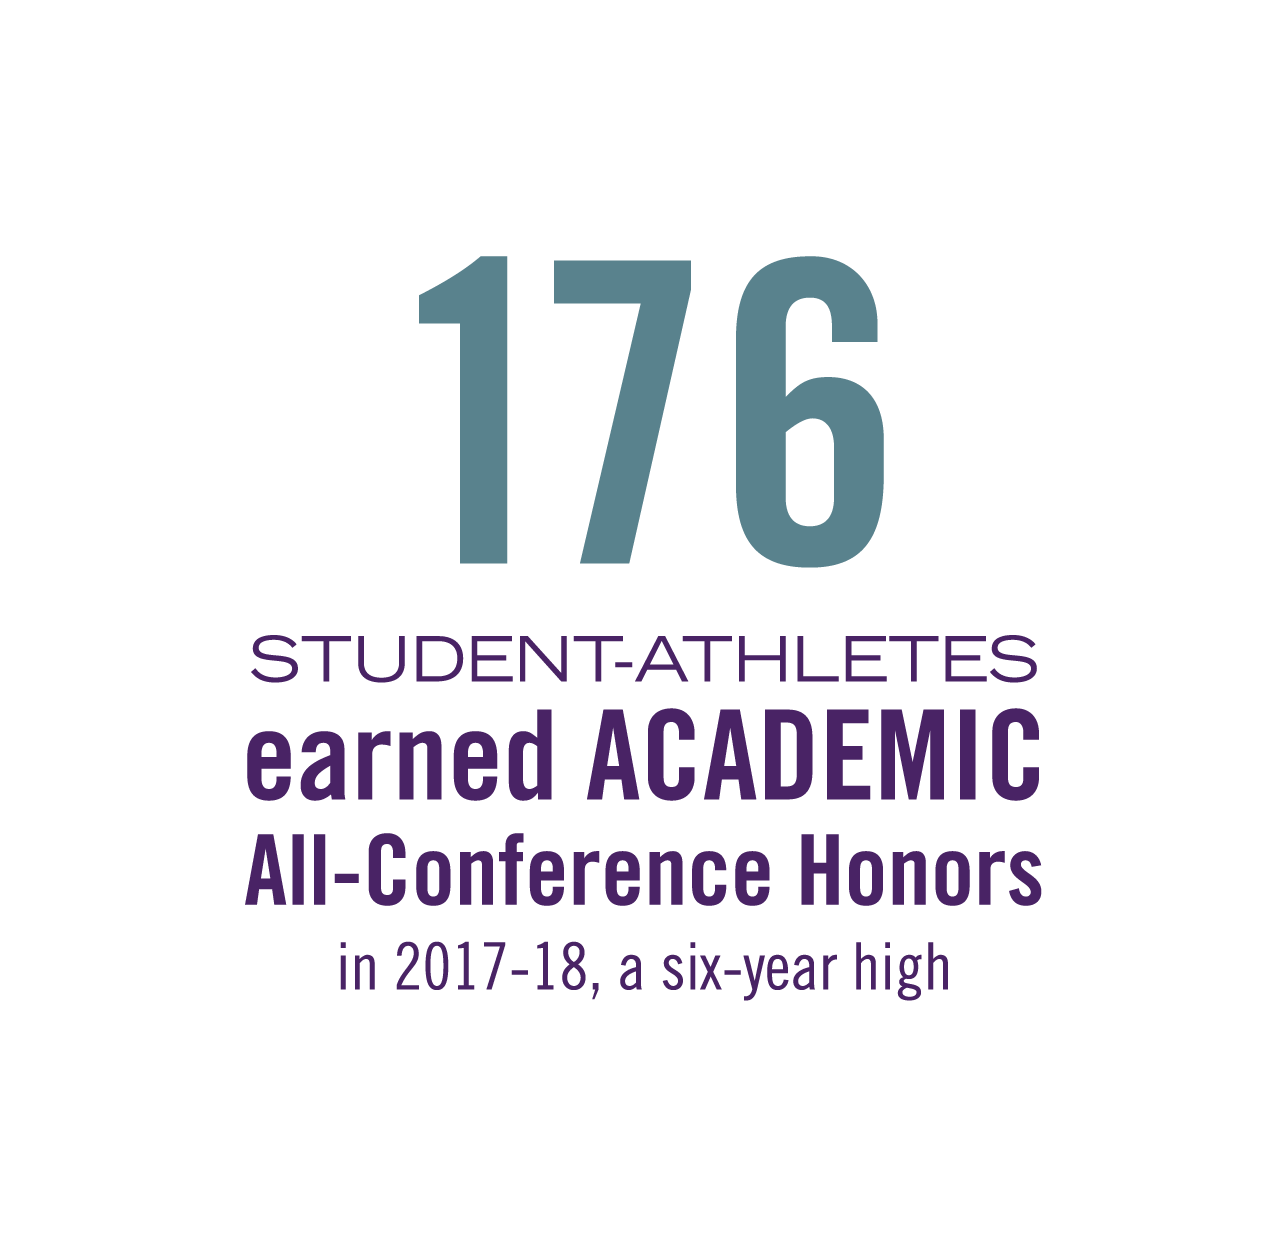 image text: 176 student athletes earned academic all-conference honors in 2017 to 2018, a six year high